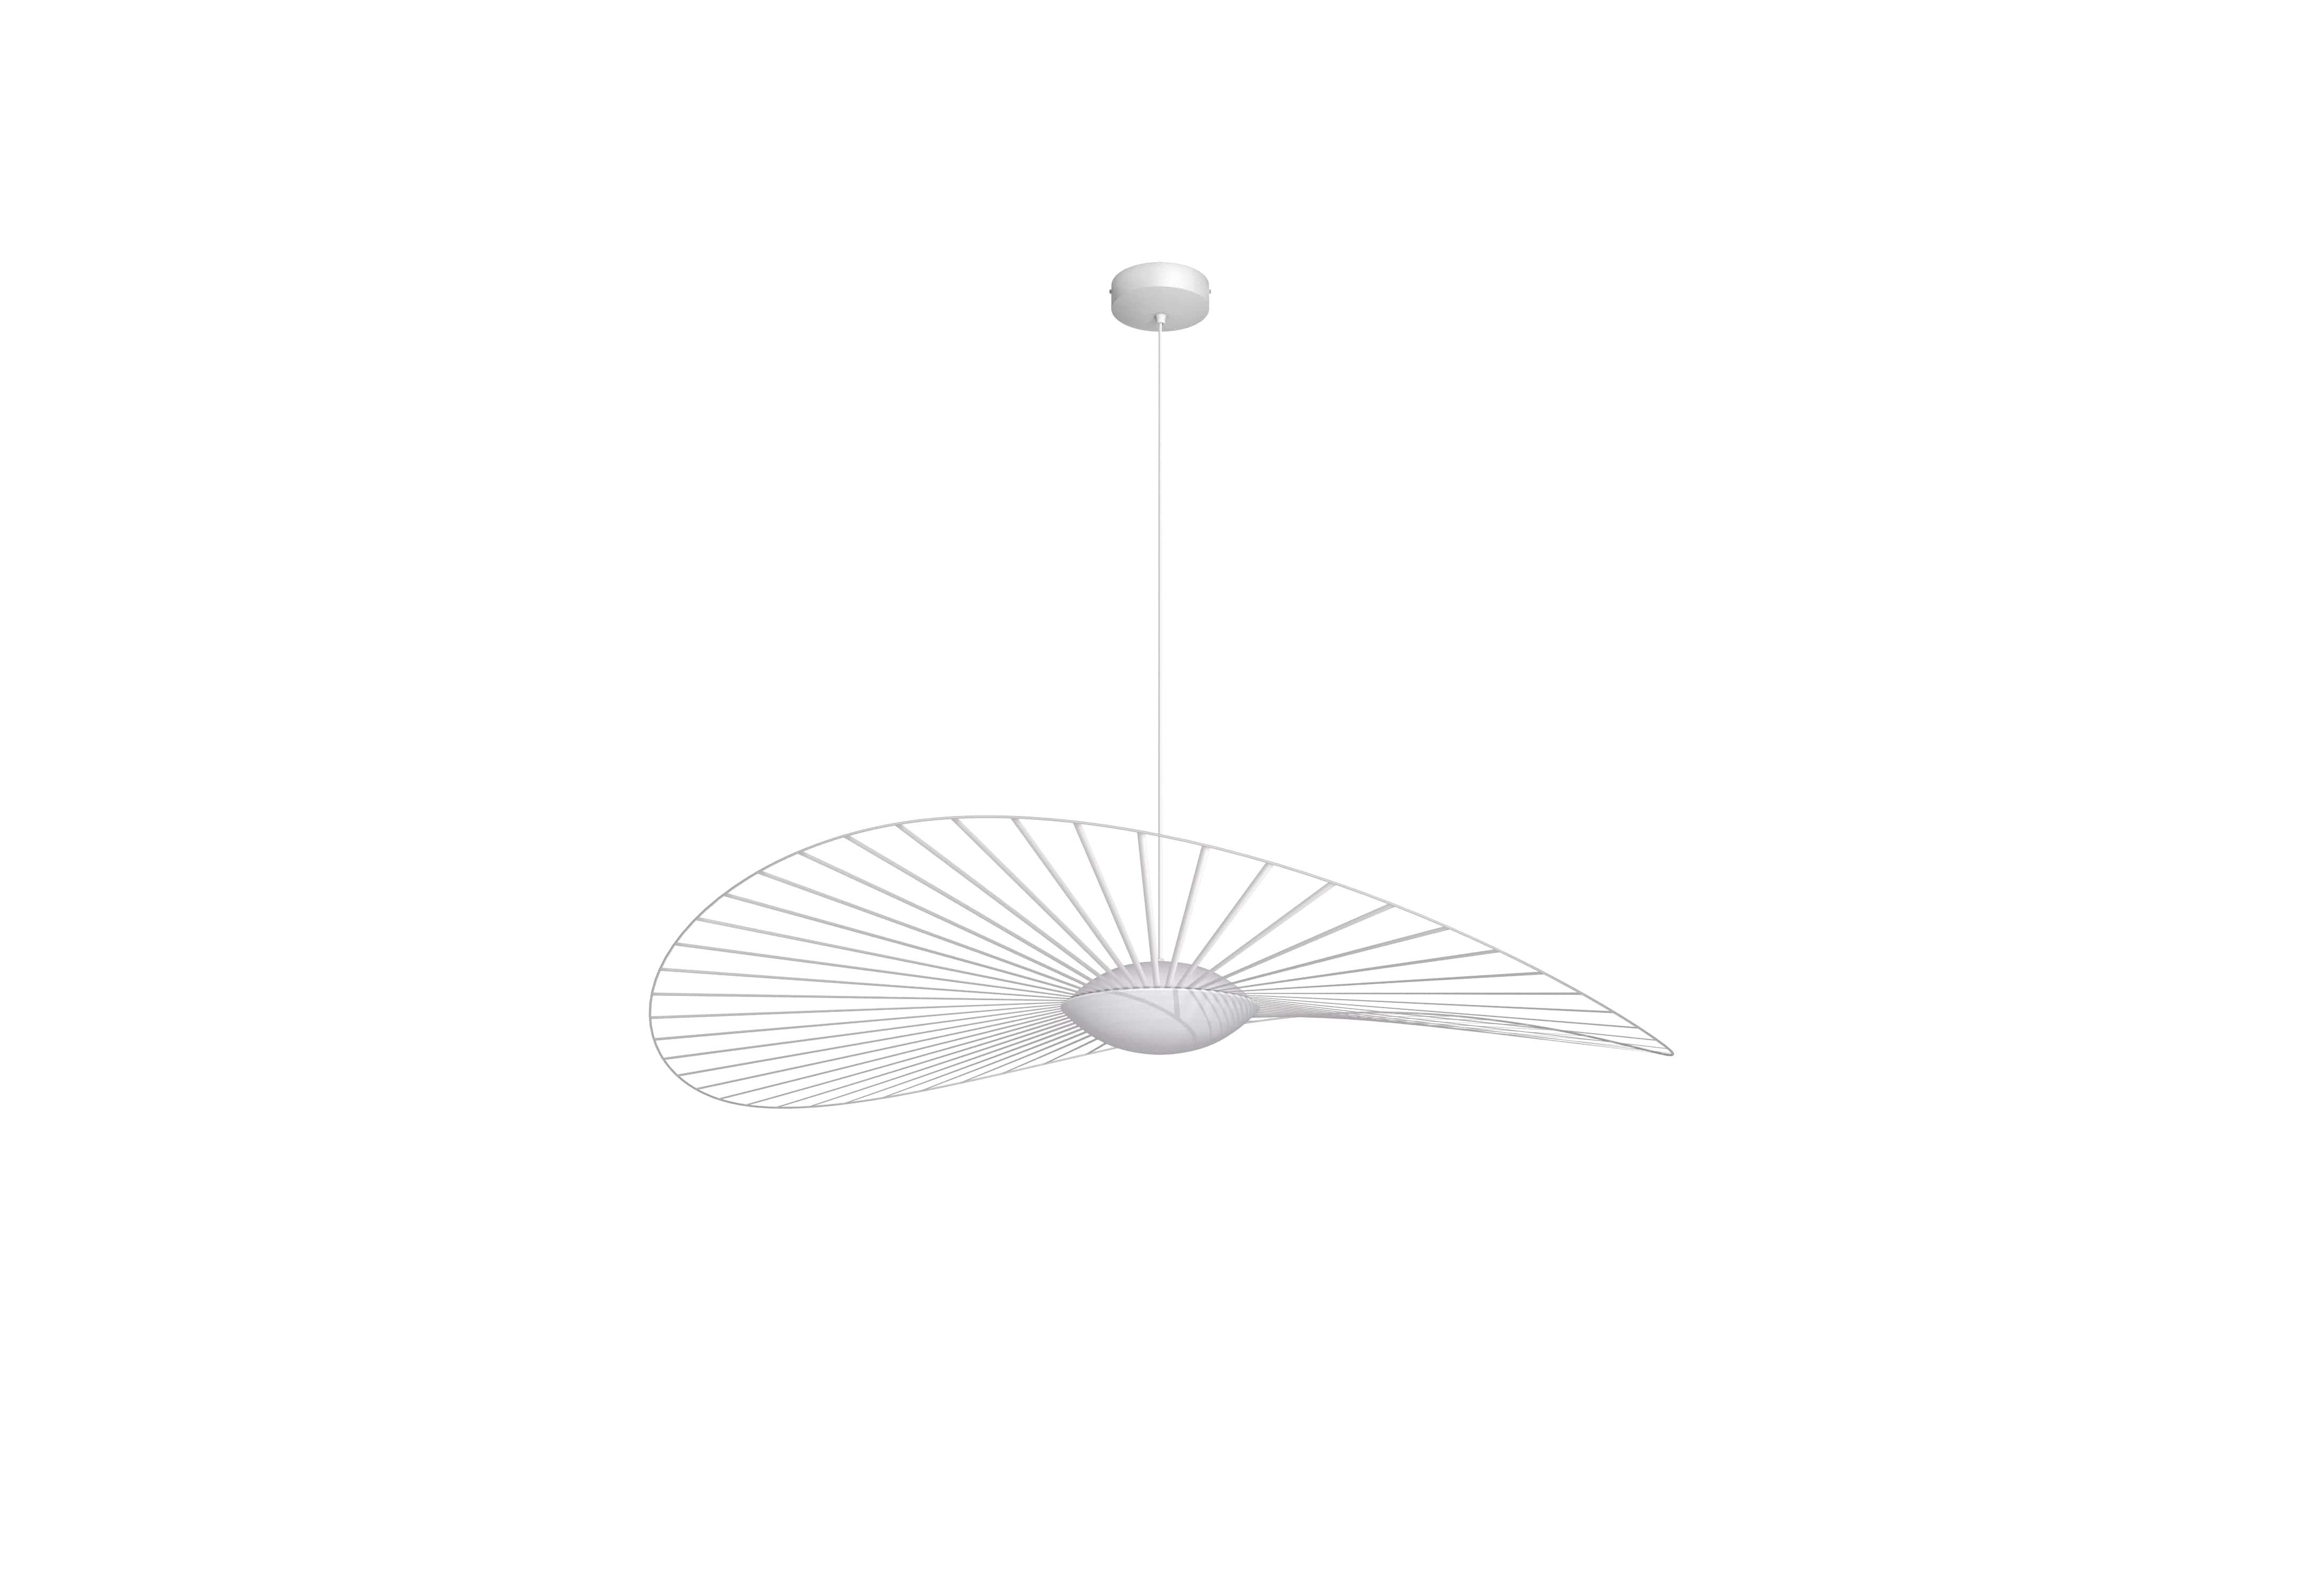 Petite Friture Medium Vertigo Nova Pendant Light in White by Constance Guisset, 2020

Vertigo Nova is a highly technical collection that doesn't compromise on the design's iconic poetic elegance. A line that comes in black or white, for two subtly